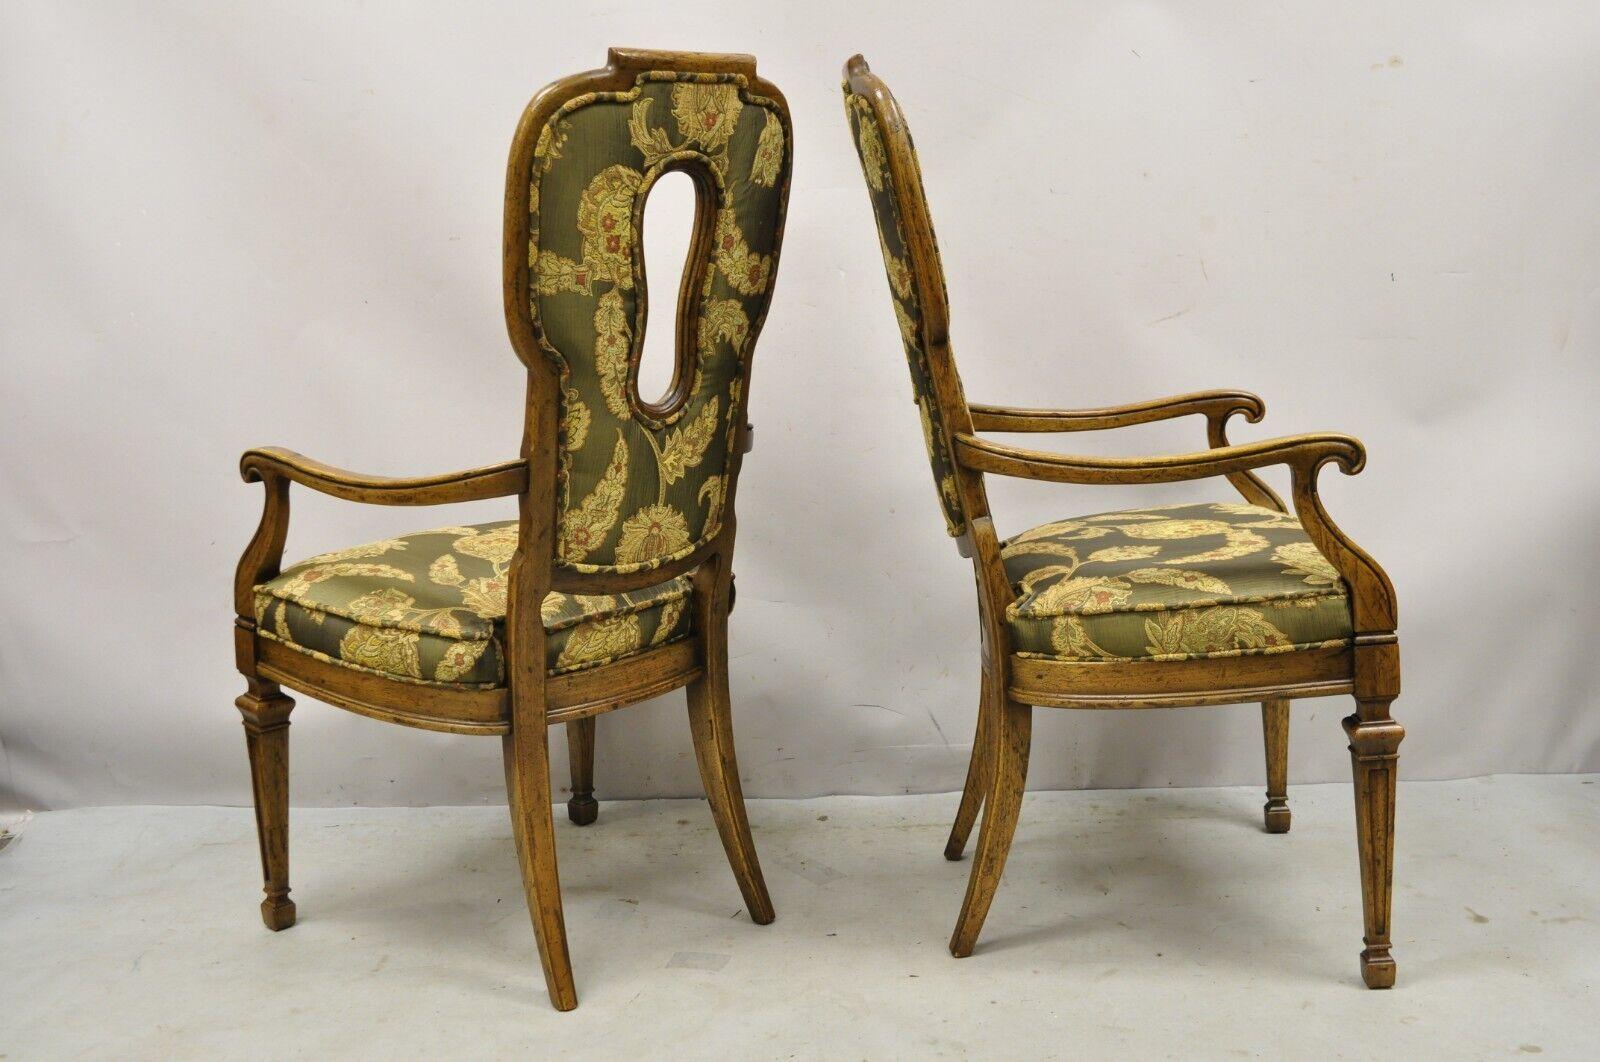 Vintage Hollywood Regency Keyhole Back Fireside Lounge Arm Chairs - a Pair For Sale 3